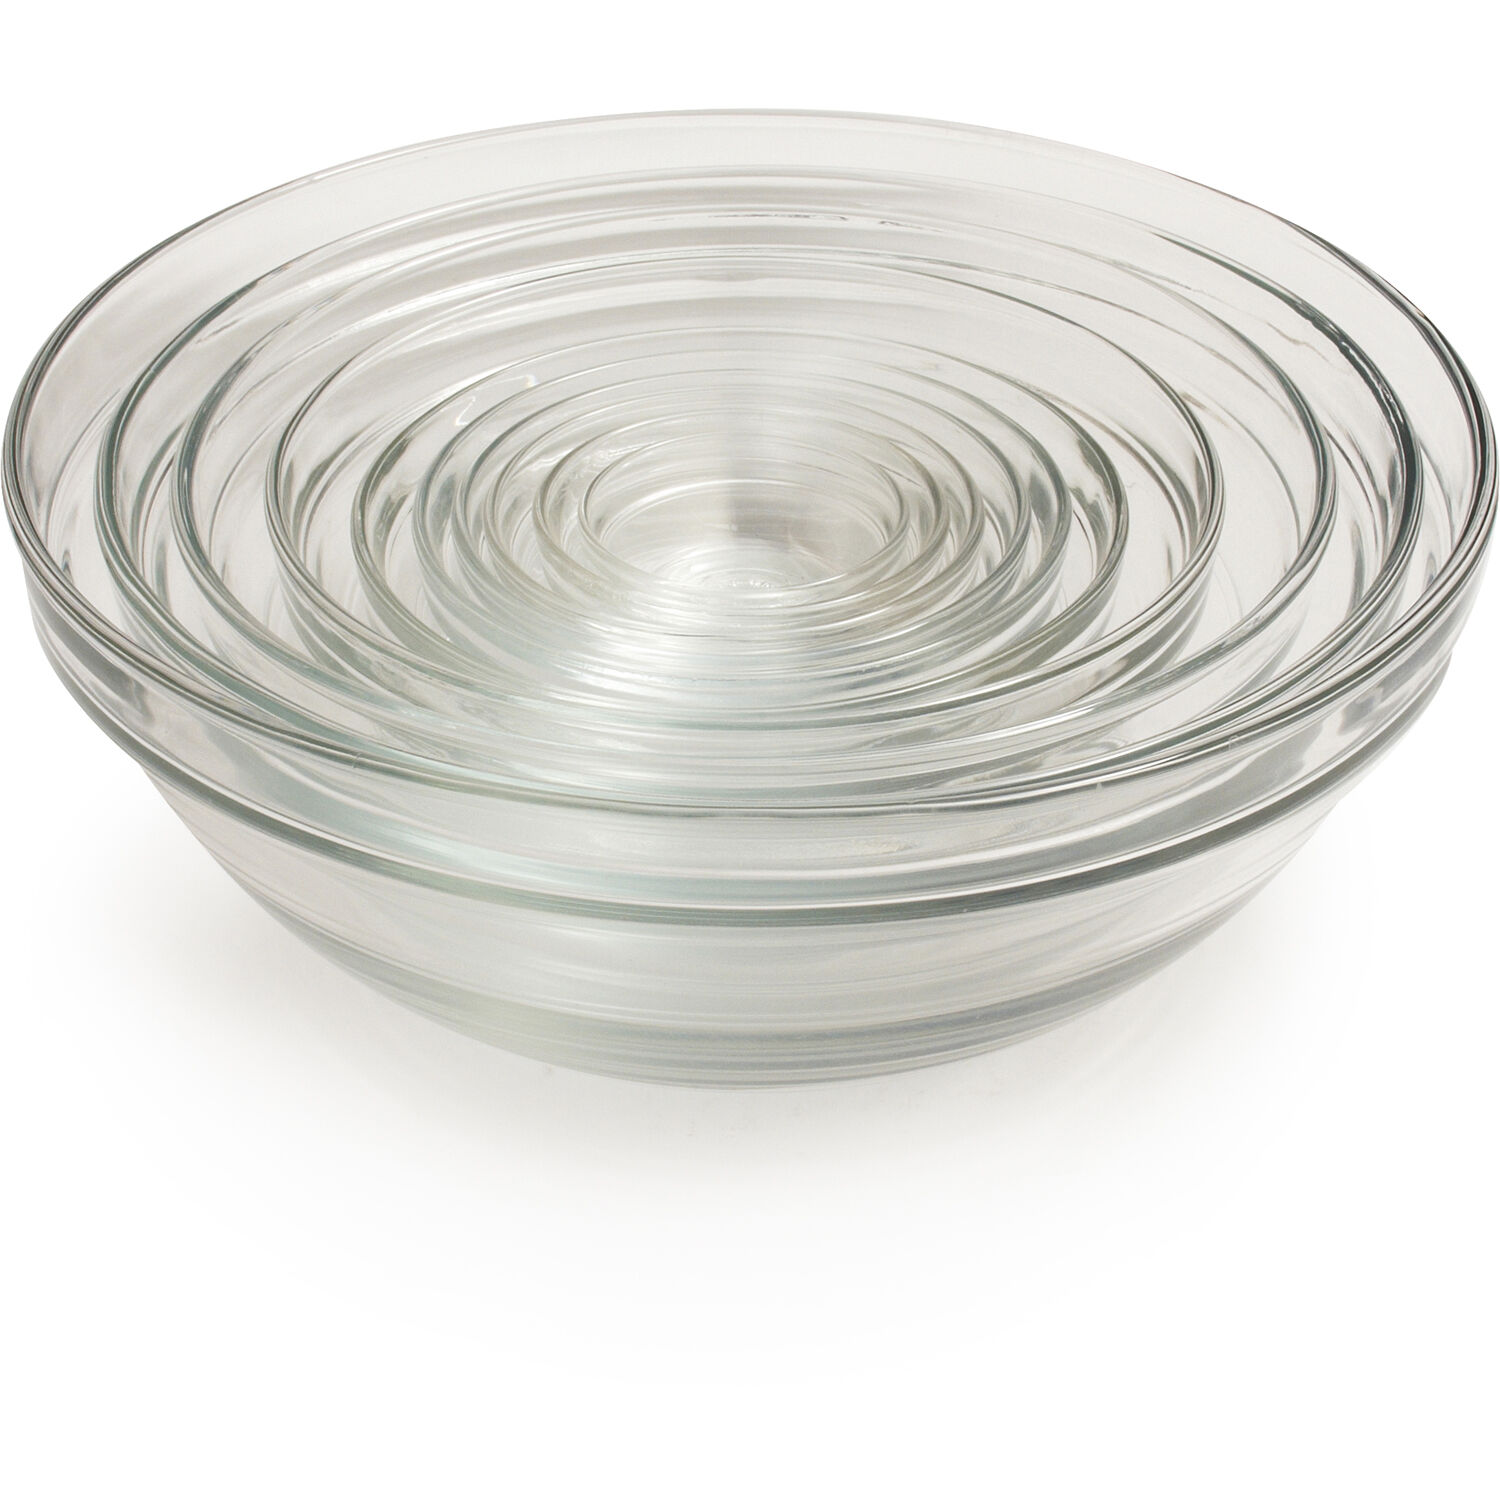 Set of 6 Duralex Made In France Lys 10-1/4-Inch Stackable Clear Bowl